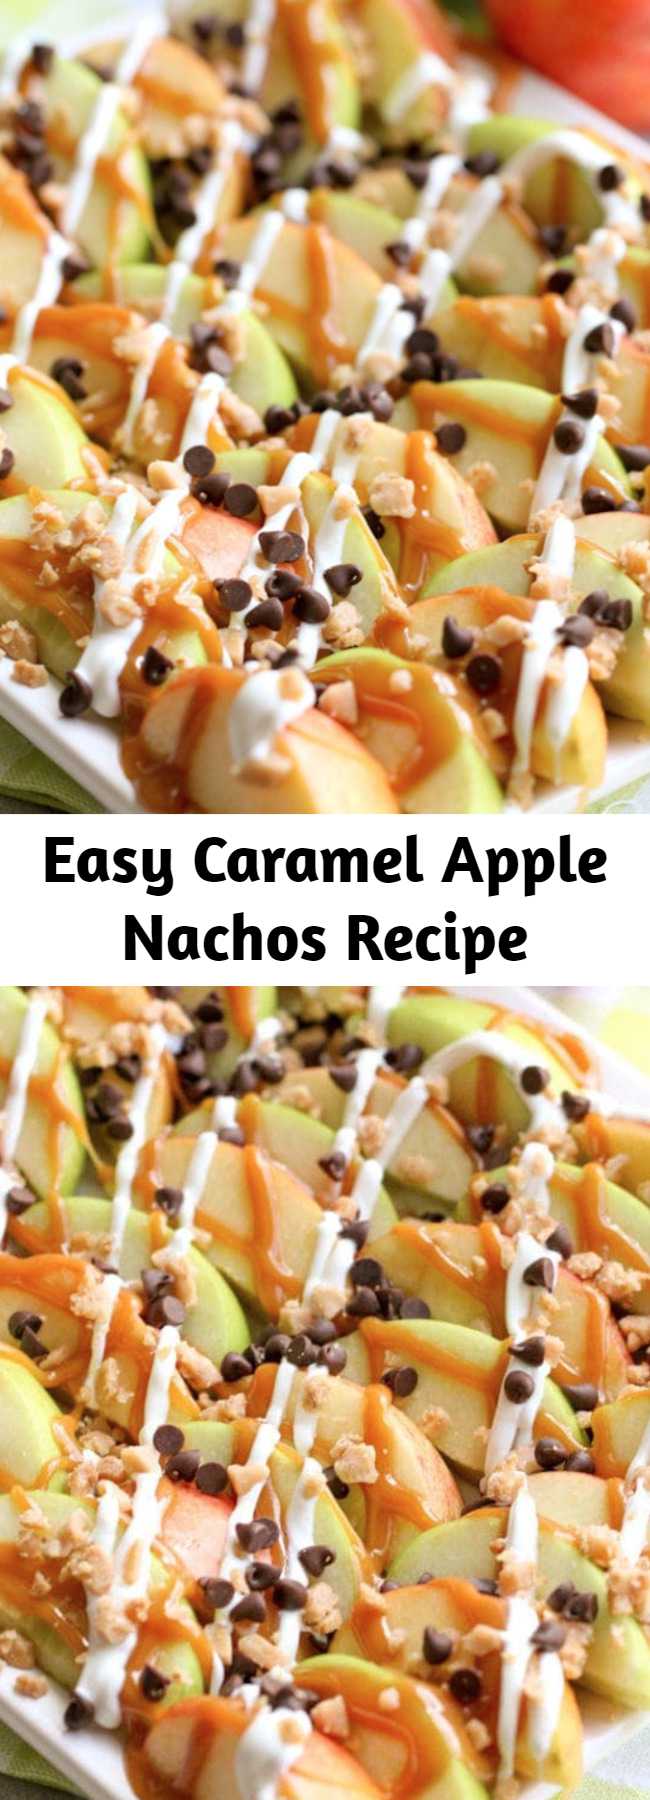 Easy Caramel Apple Nachos Recipe - These Caramel Apple Nachos are an easy treat perfect for movie nights and get togethers. Sliced apples drizzled in caramel and white chocolate, and topped with chocolate chips and toffee bits - it tastes just like a caramel apple, but simpler to make!